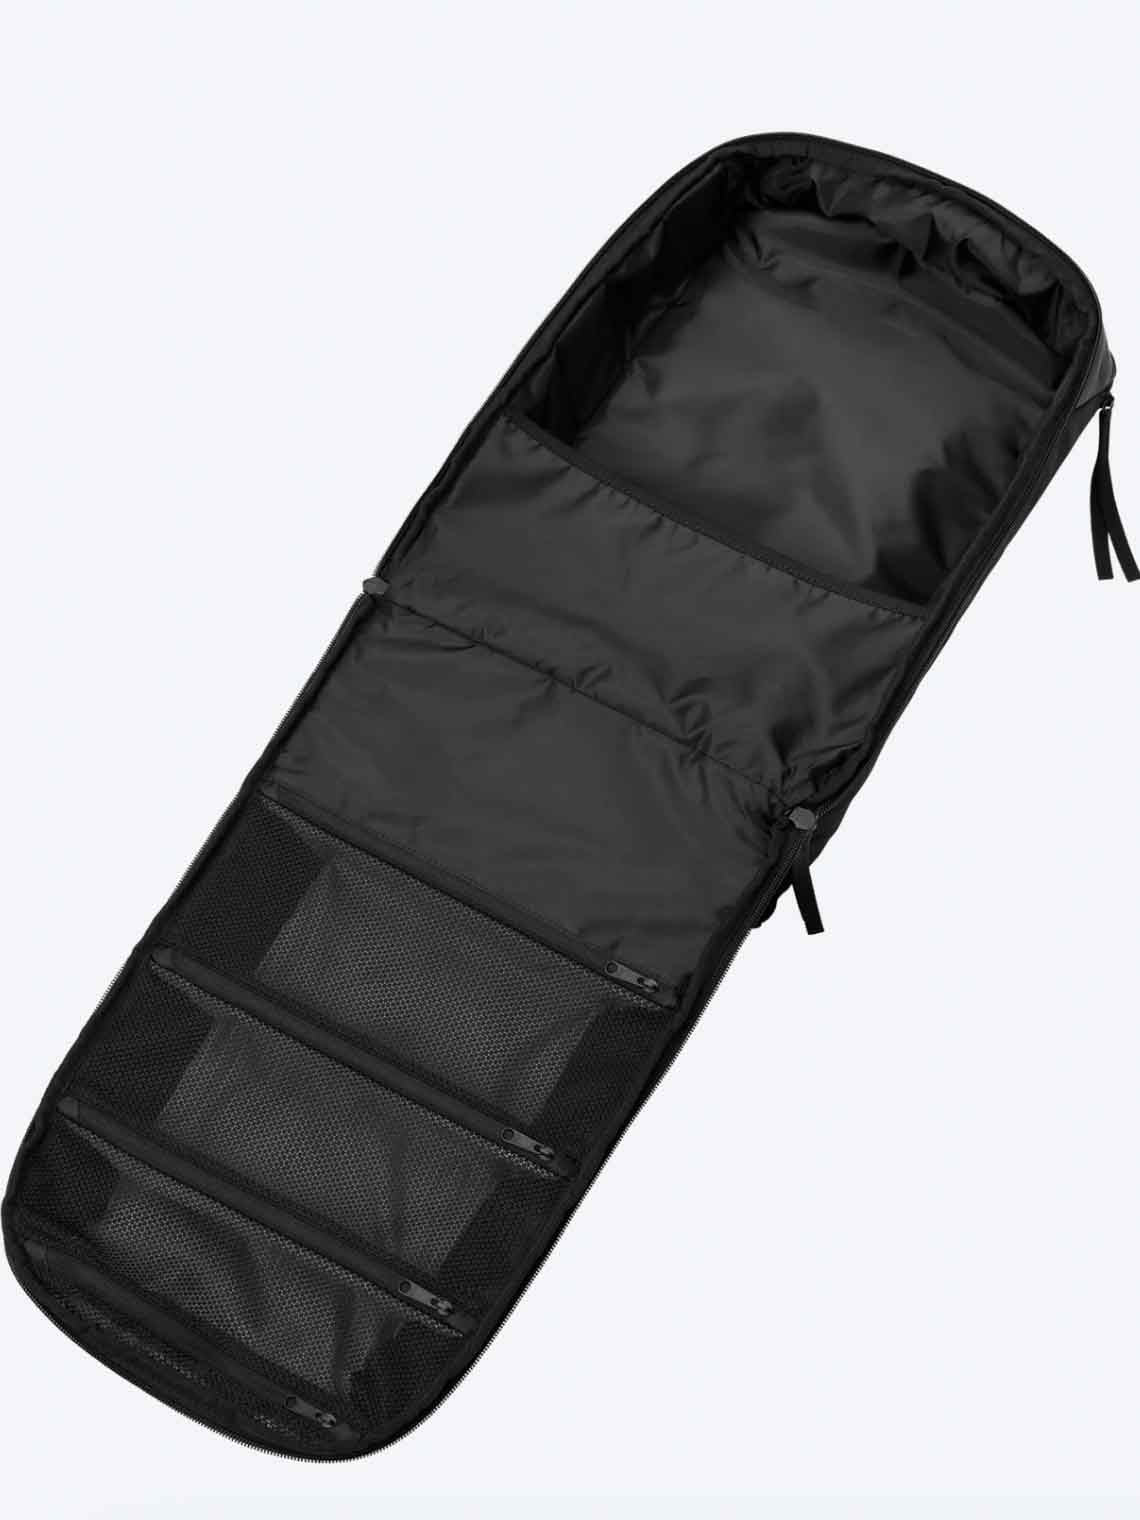 Db The Makeløs 16L Backpack Black Out